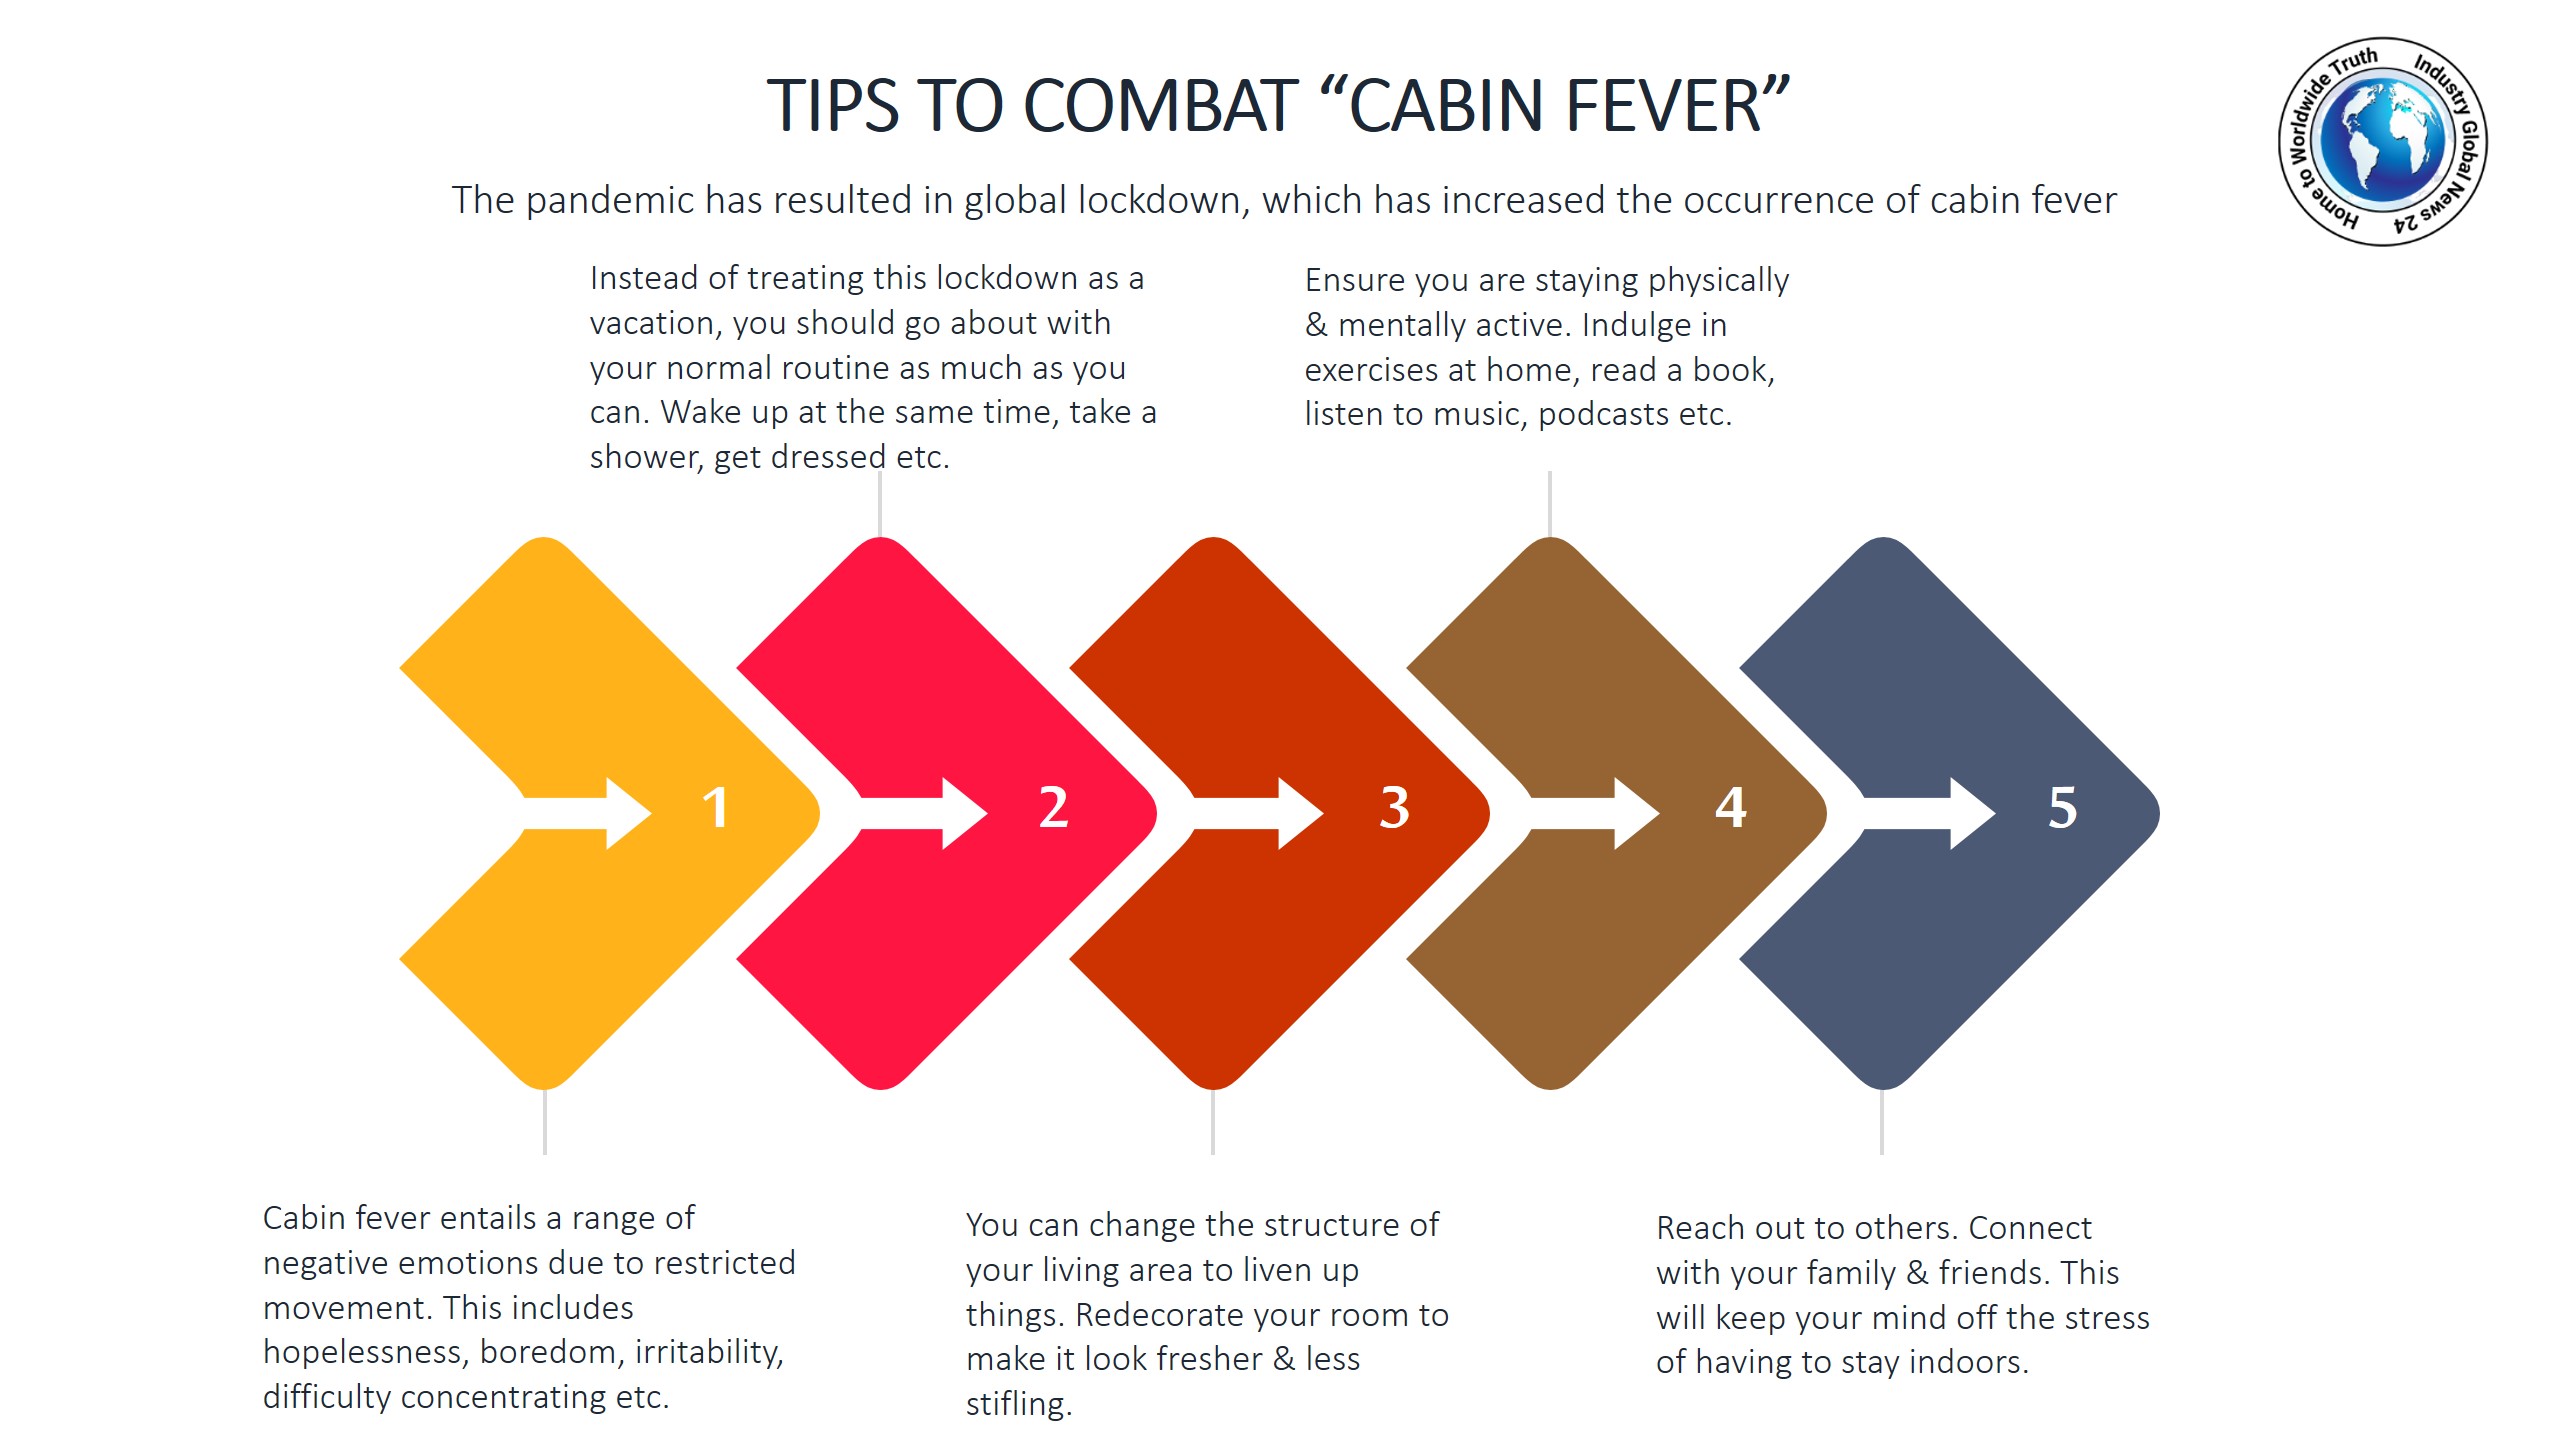 Tips to combat “cabin fever”